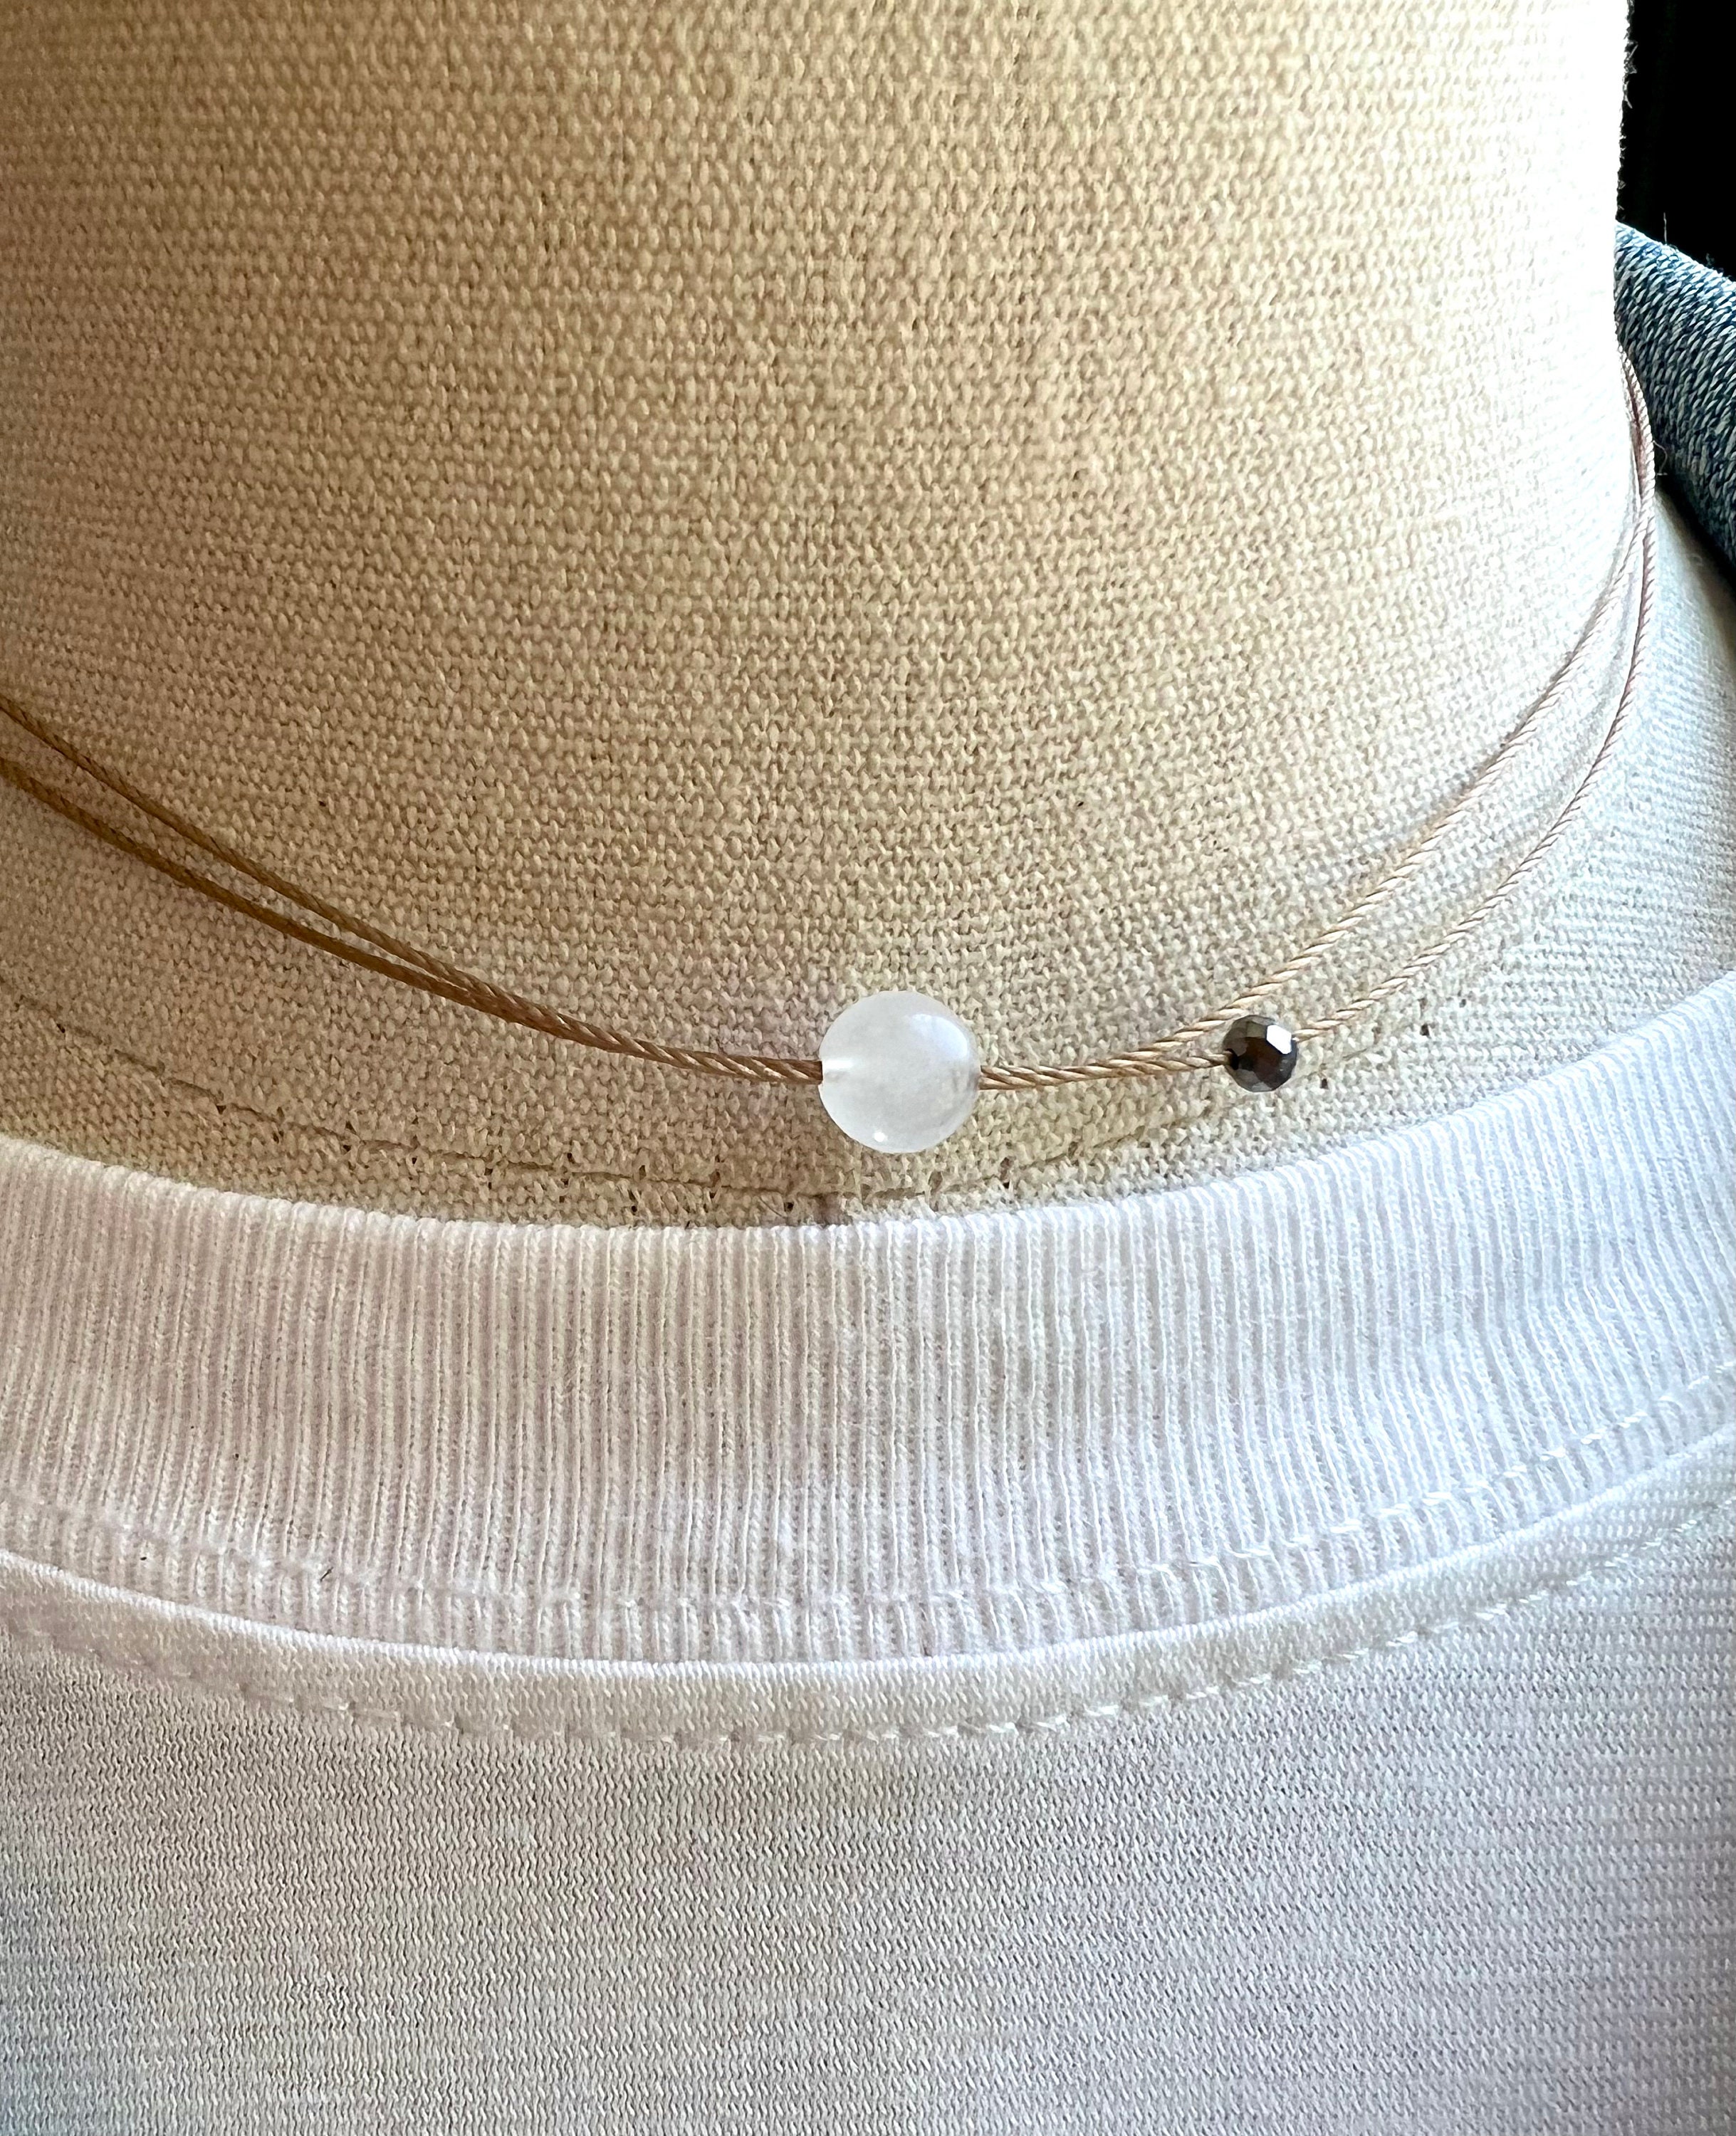 Sea Glass and Pearl Choker, Double Choker, Layering Necklace, Dainty Necklace,  String Choker, Boho Choker, Summer Necklace, Gift for Her 